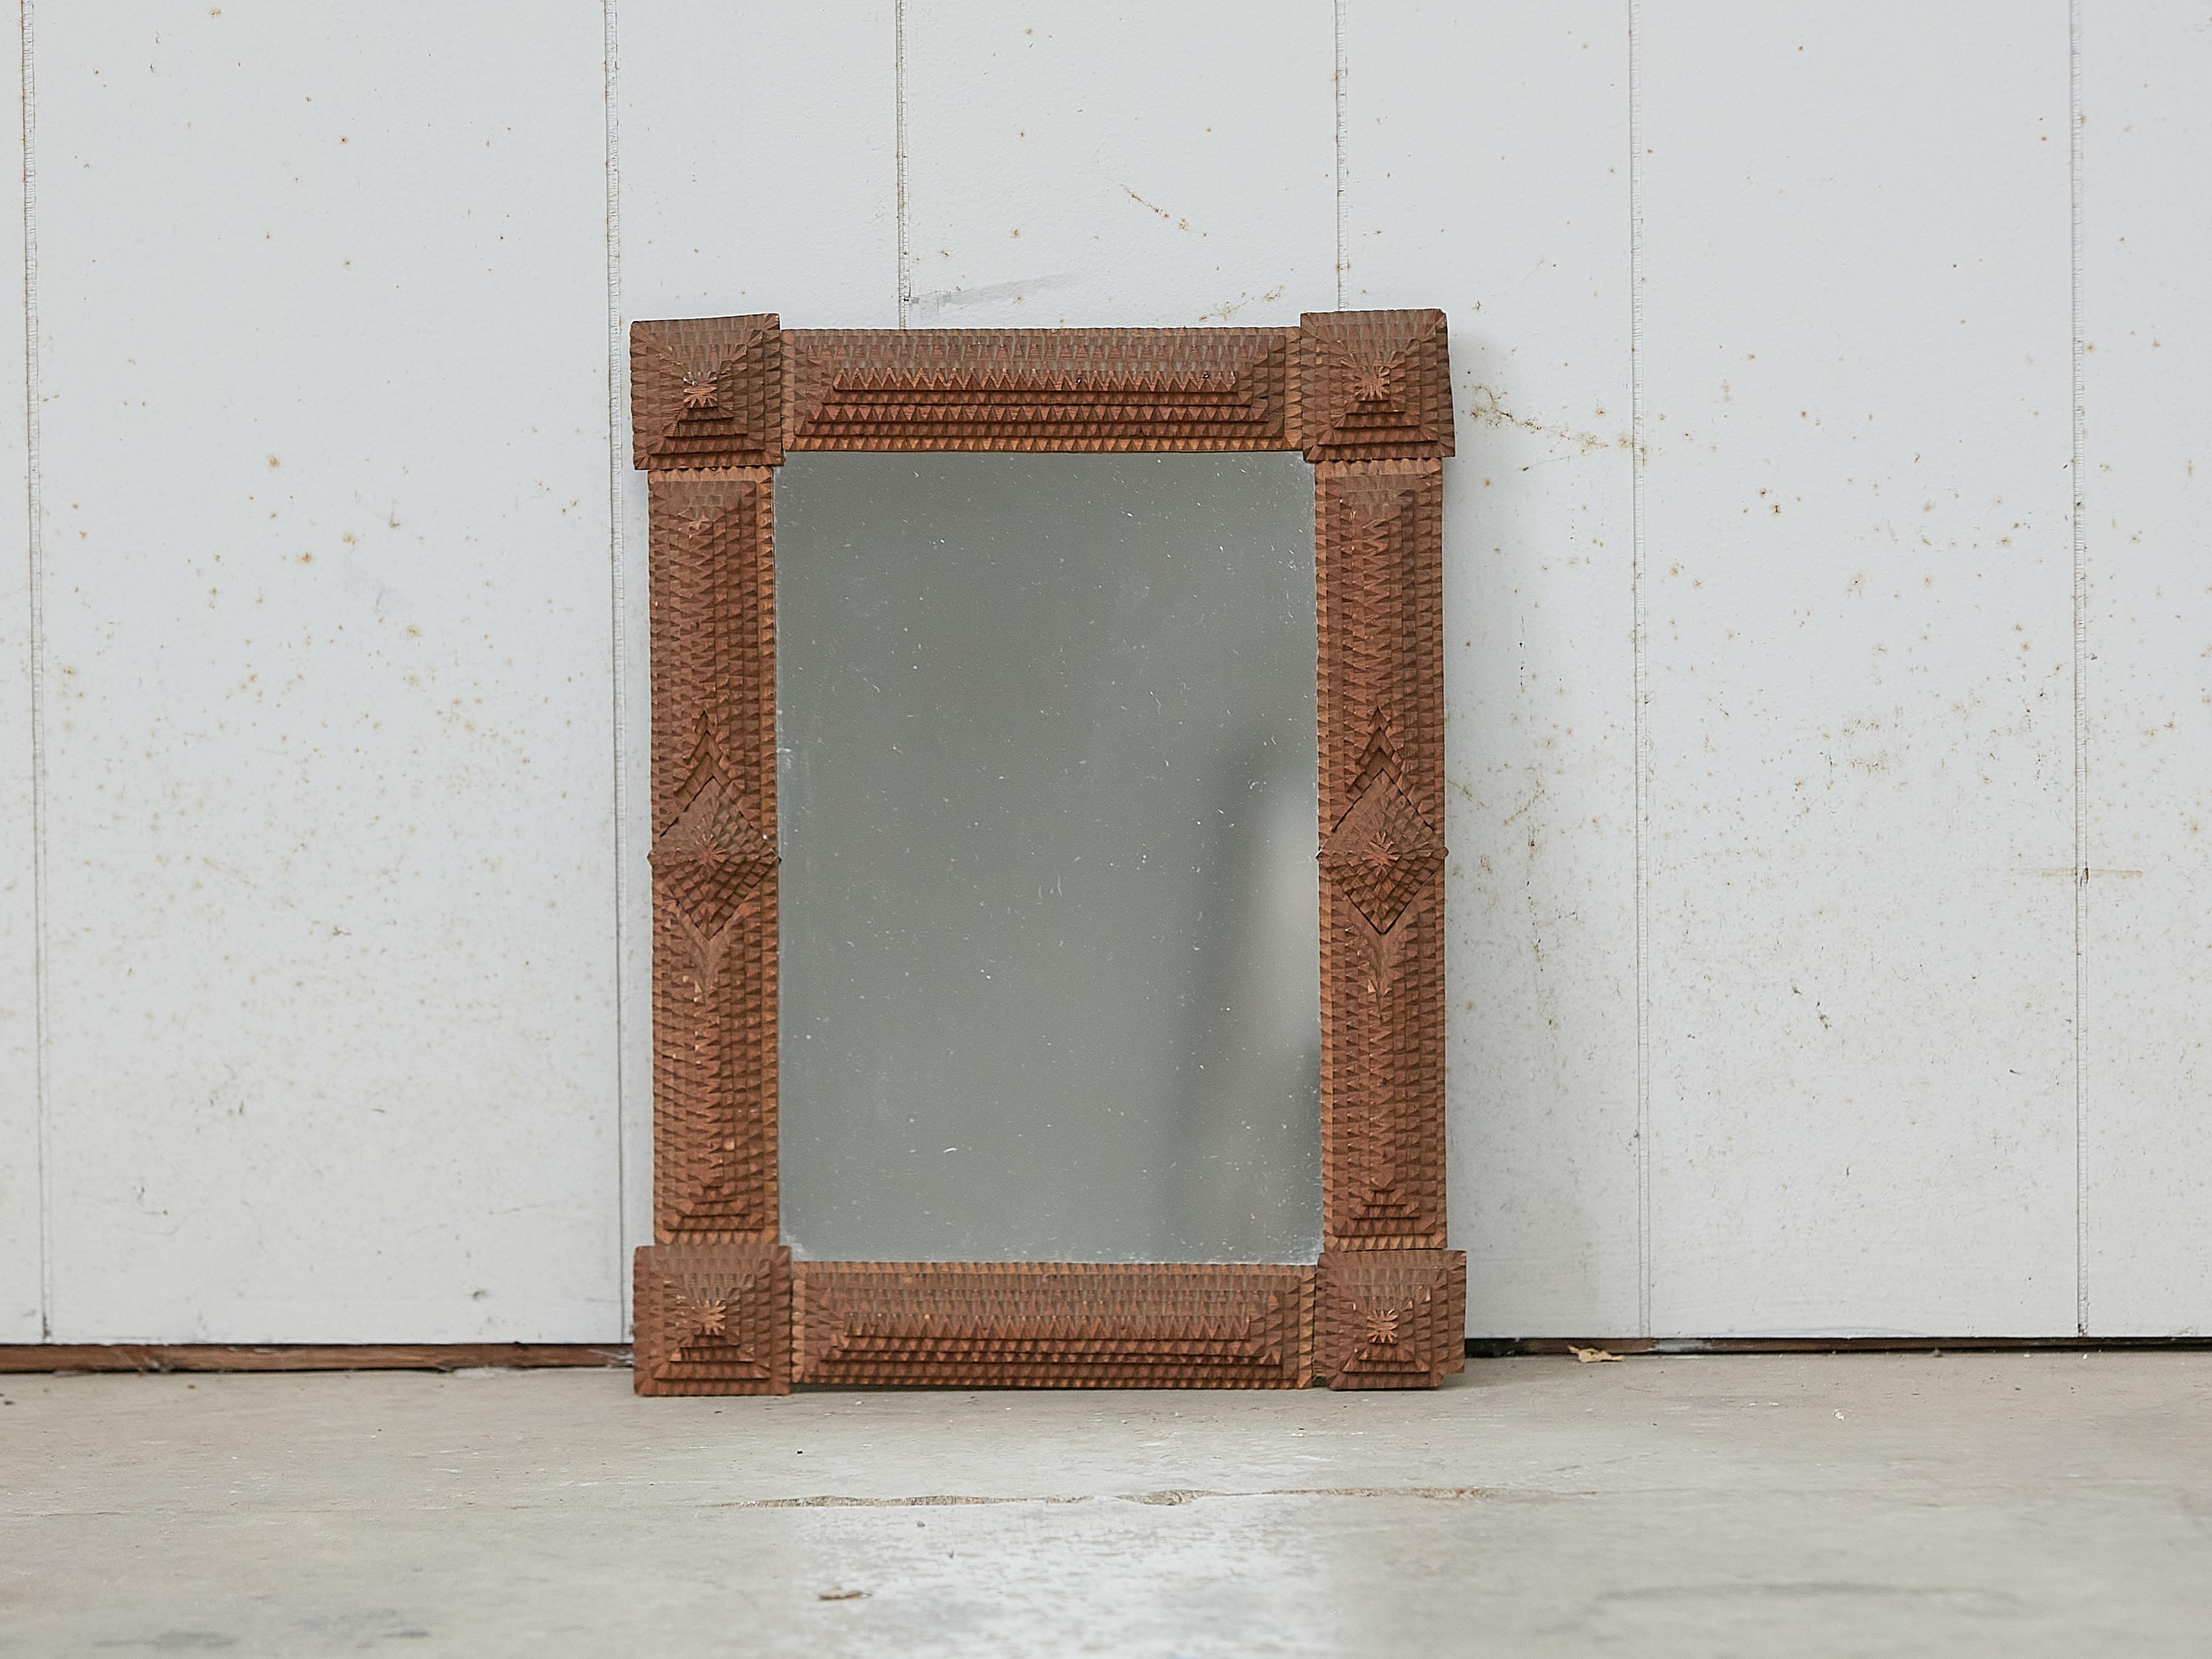 A small French Tramp Art hand carved wooden Folk mirror from the early 20th century with raised diamond motifs and protruding corners. Created in France during the Turn of the Century which saw the transition between the 19th to the 20th, this Folk